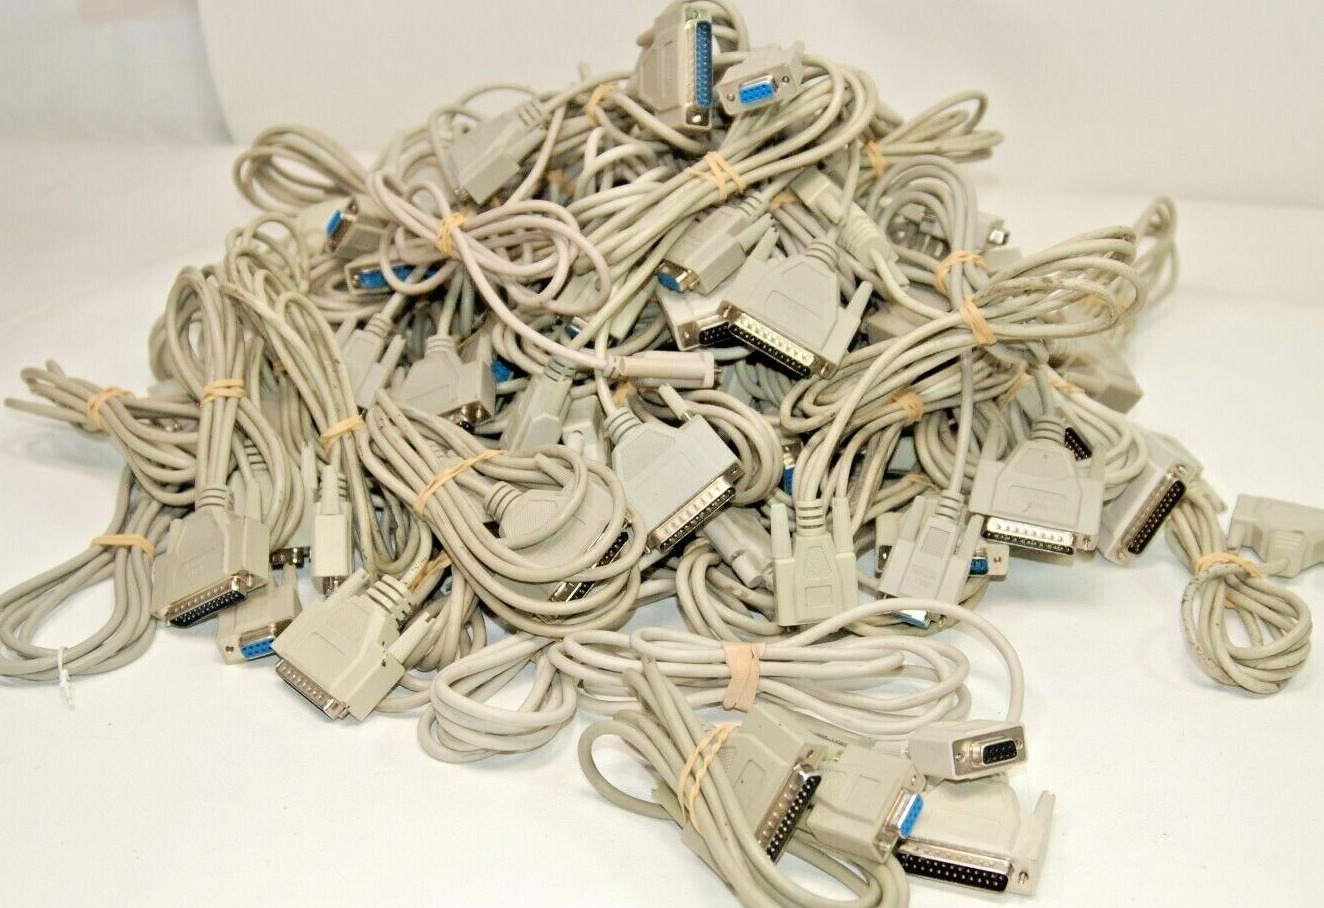 Lot of 58 6' DB9 9Pin Female to DB25 25Pin Male AT Modem Cables Serial RS232  